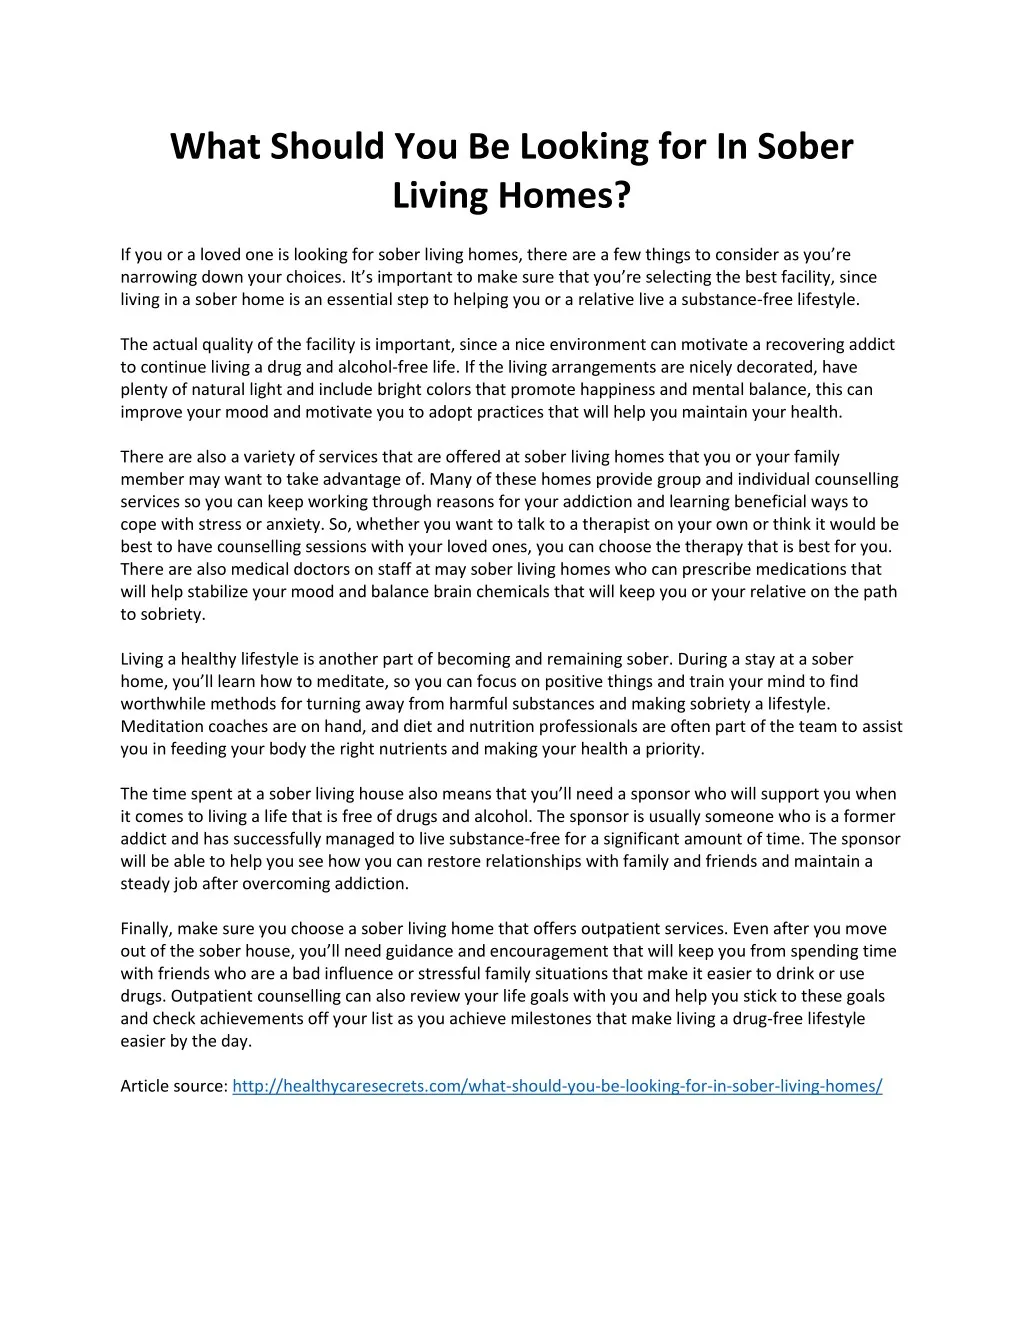 what should you be looking for in sober living